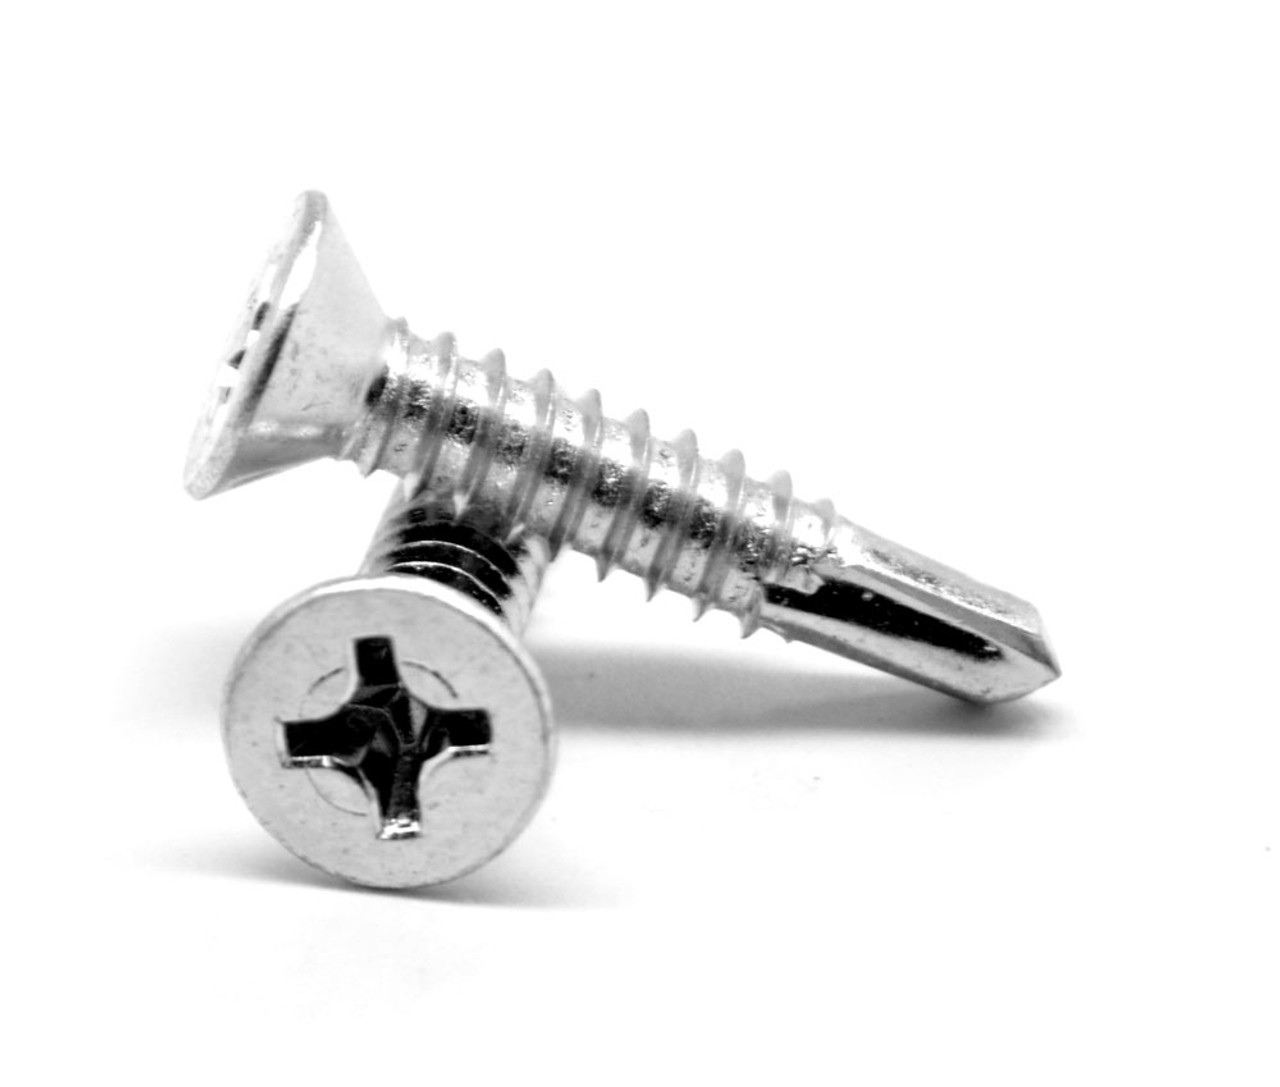 #7-19 x 3/4" (FT) Self Drilling Screw Phillips Flat Head #2 Point Low Carbon Steel Zinc Plated